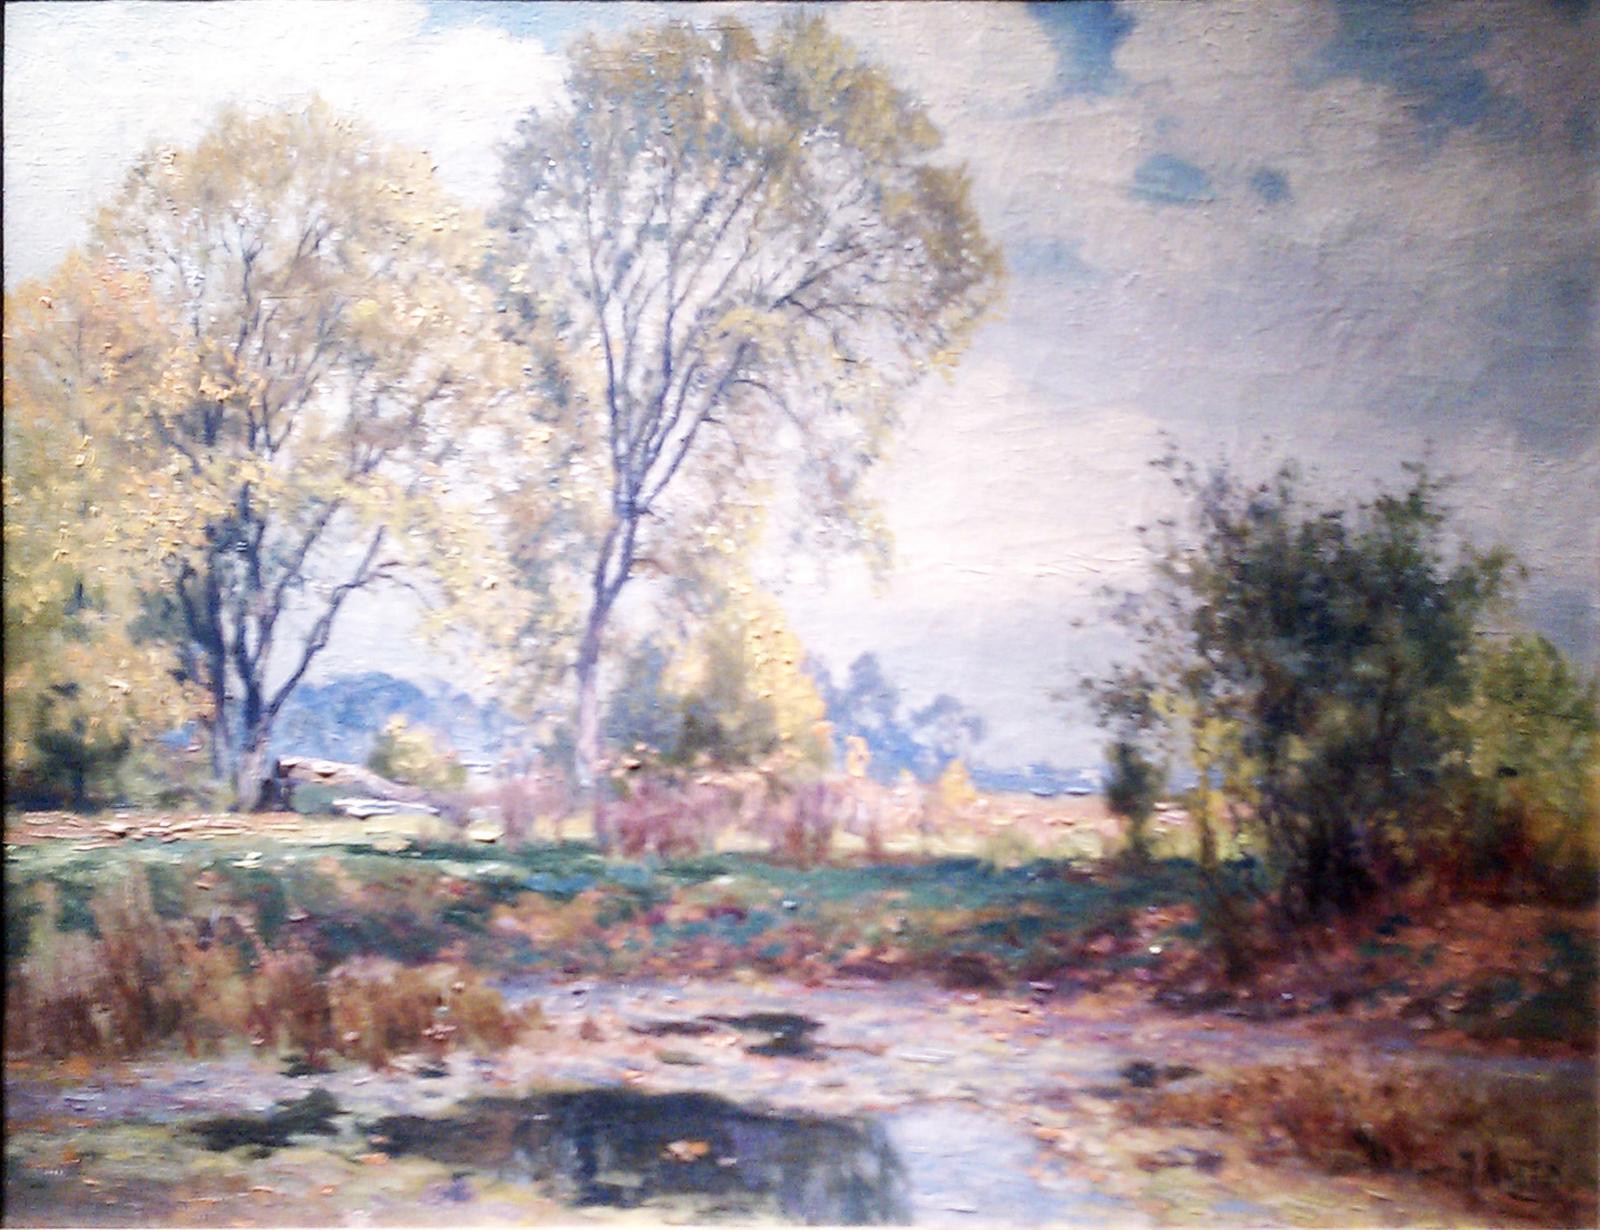 Landscape with a pond, trees, and clouds against a blue sky in the background.